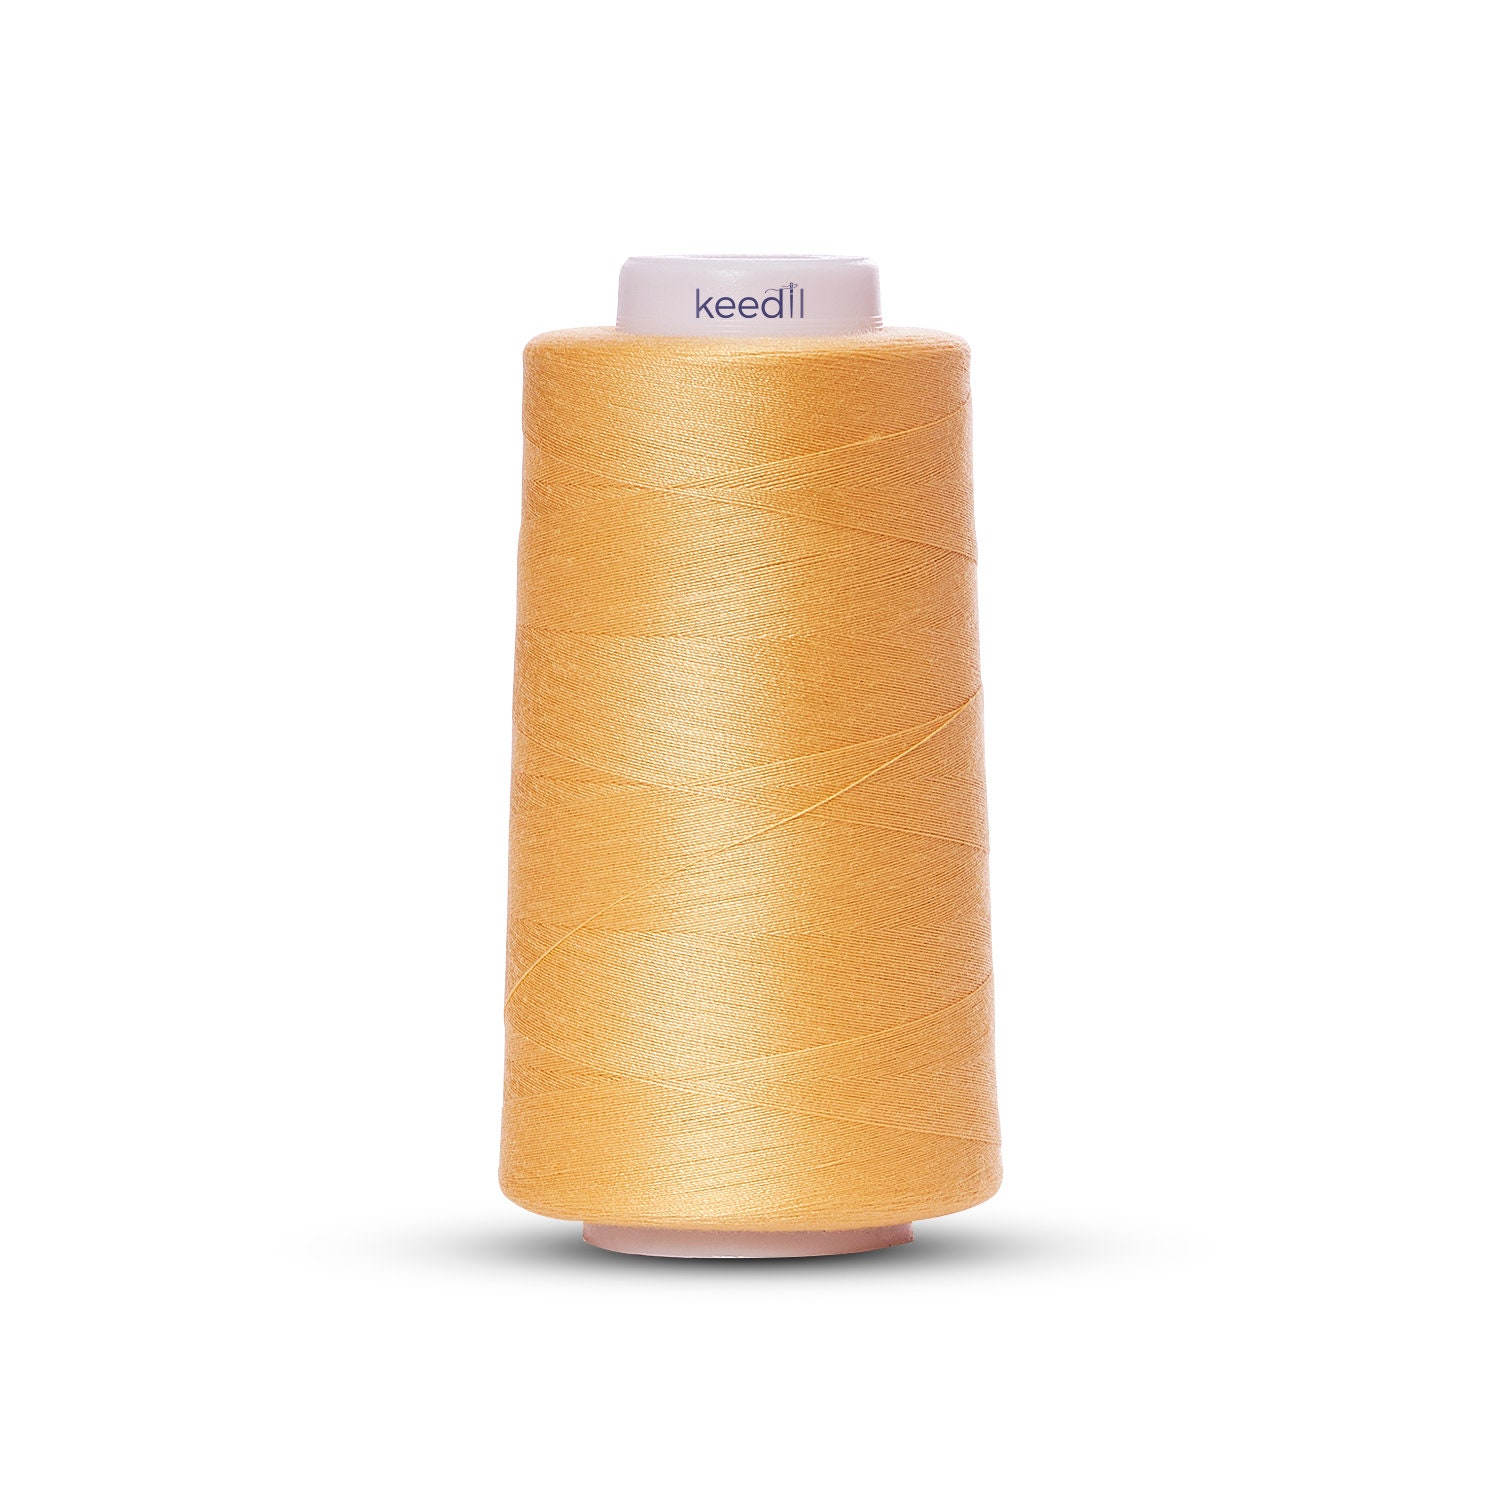  Serger Thread, All-Purpose Thread for Sewing, White Black  Thread, Polyester Sewing Thread, 4 Cones of 3000 Yards Each Spool Thread  for Sewing Machine Thread